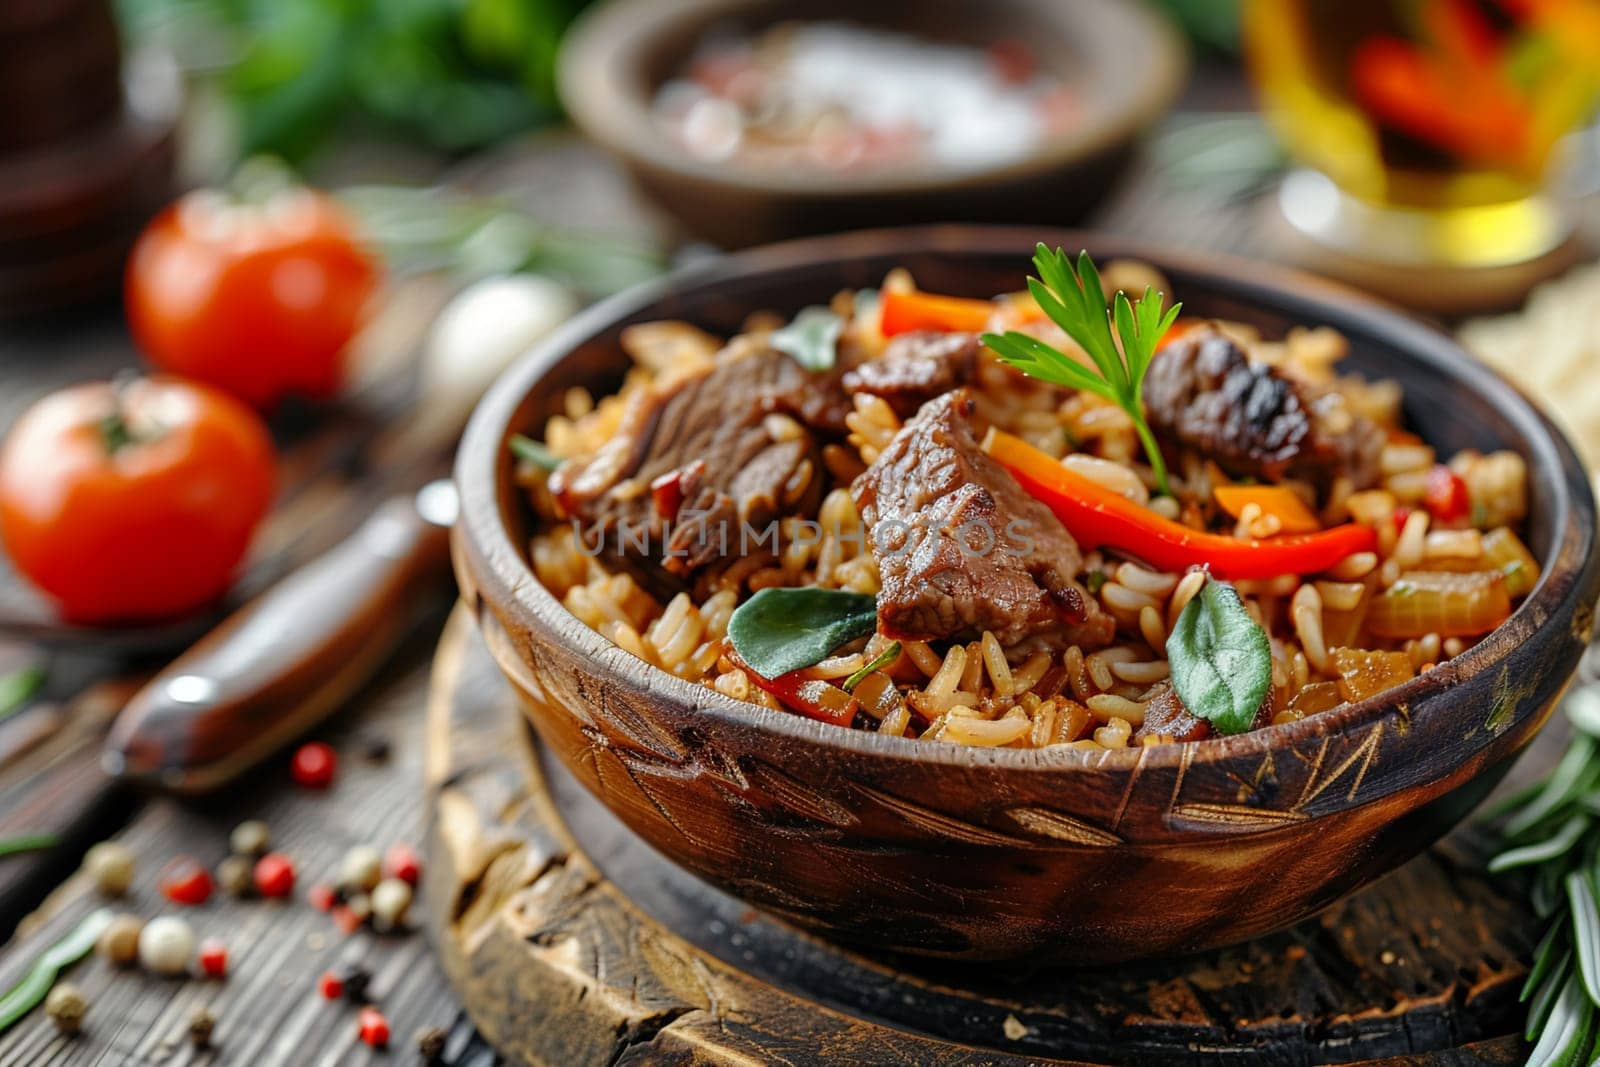 Wooden bowl of delicious pilaf with meat, vegetables, and herbs, presented on a rustic wooden table with fresh ingredients around.